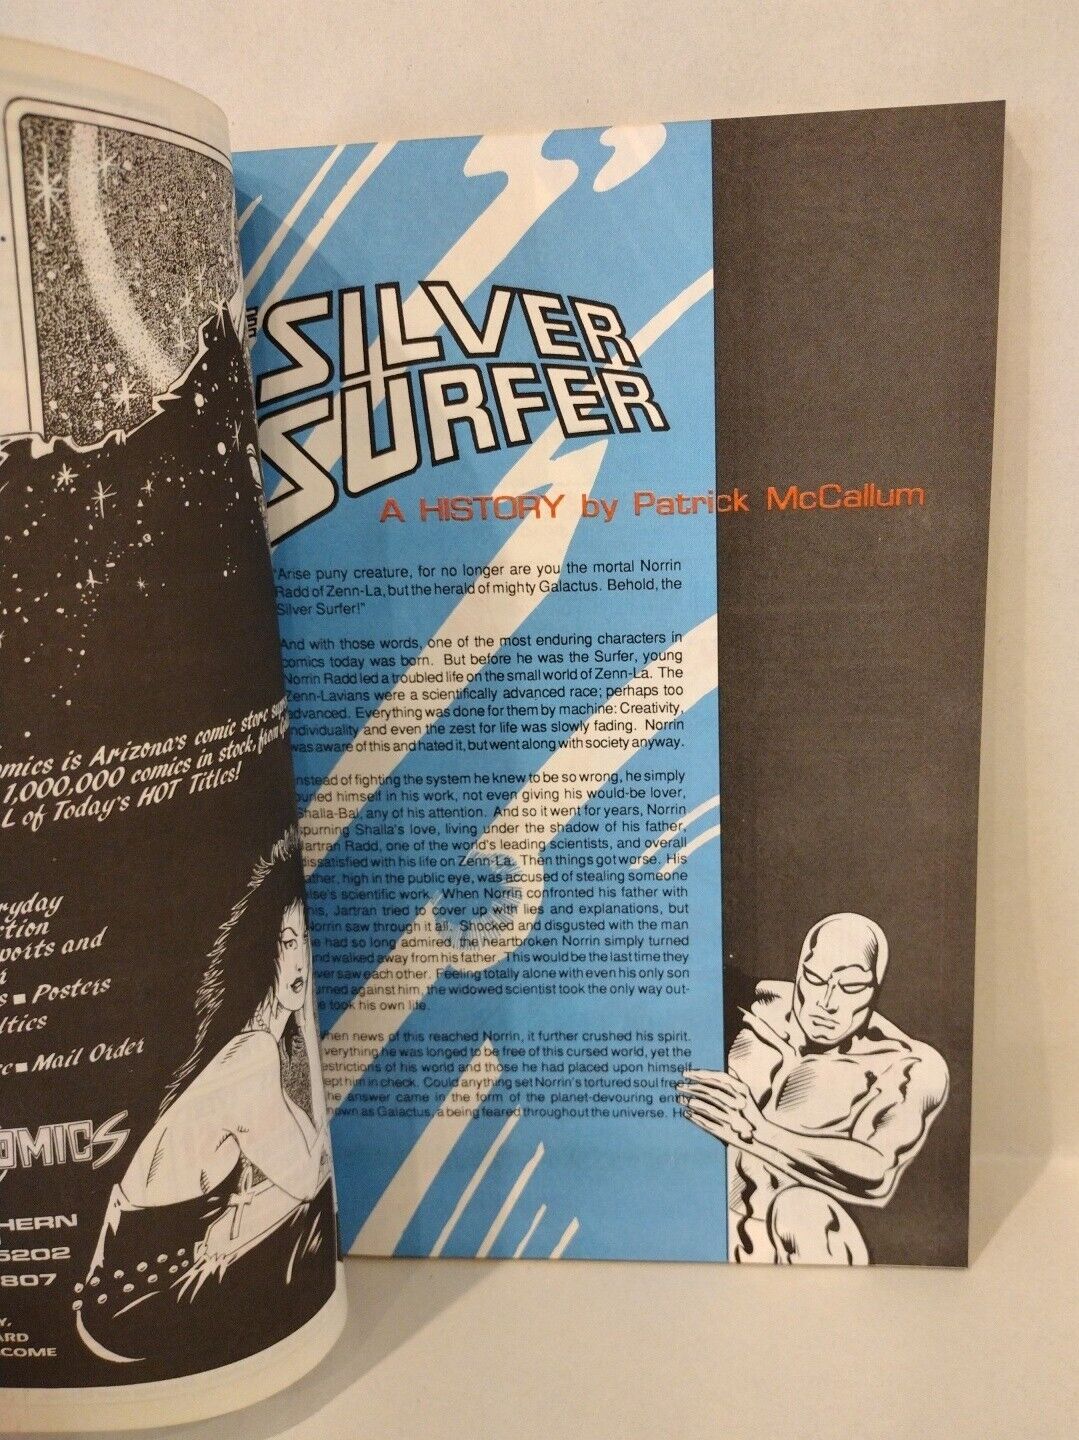 Wizard The Guide to Comics 5 (1992) Magazine Silver Surfer Issue w Poster insert